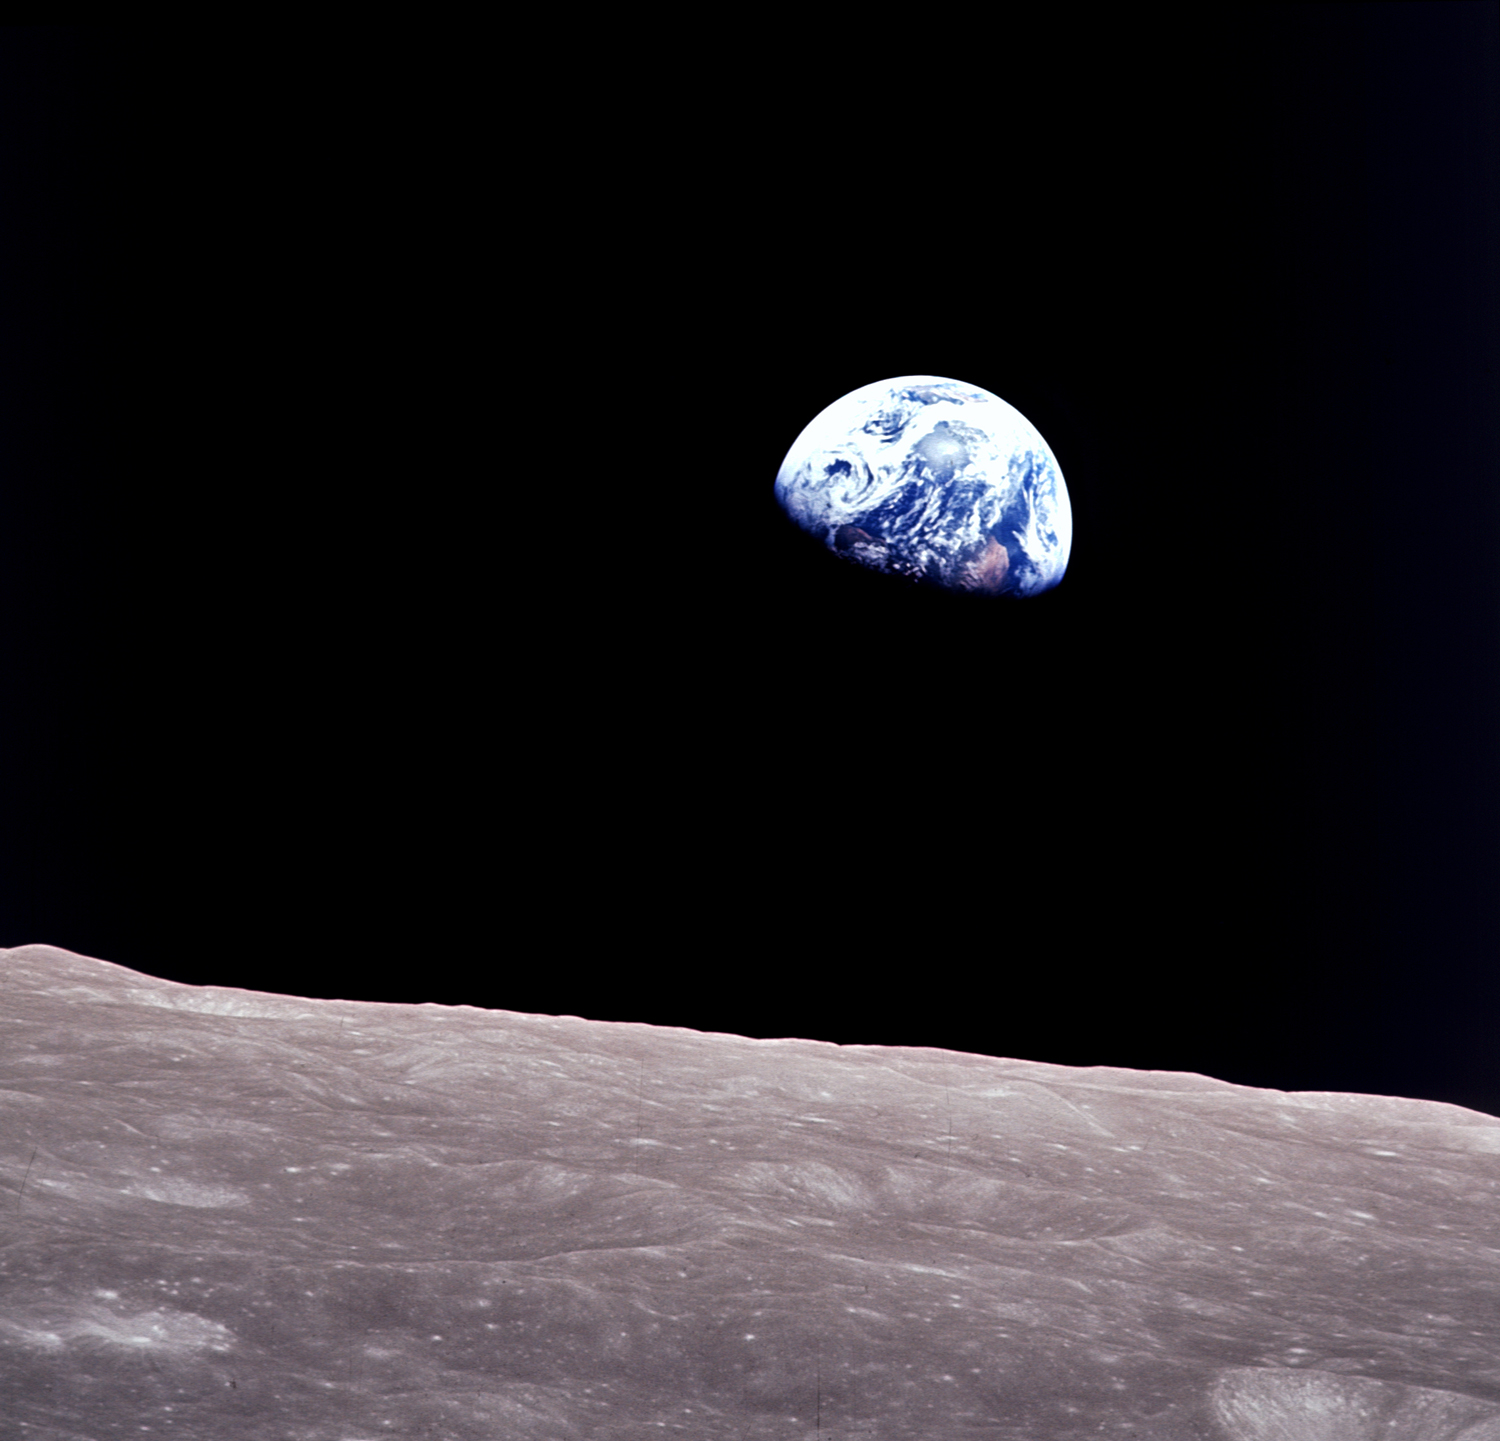 This view of Earth taken during Apollo 8's orbit of the moon shows the Earth floating in the background and the lunar surface in the foreground. It is one of our top space images.